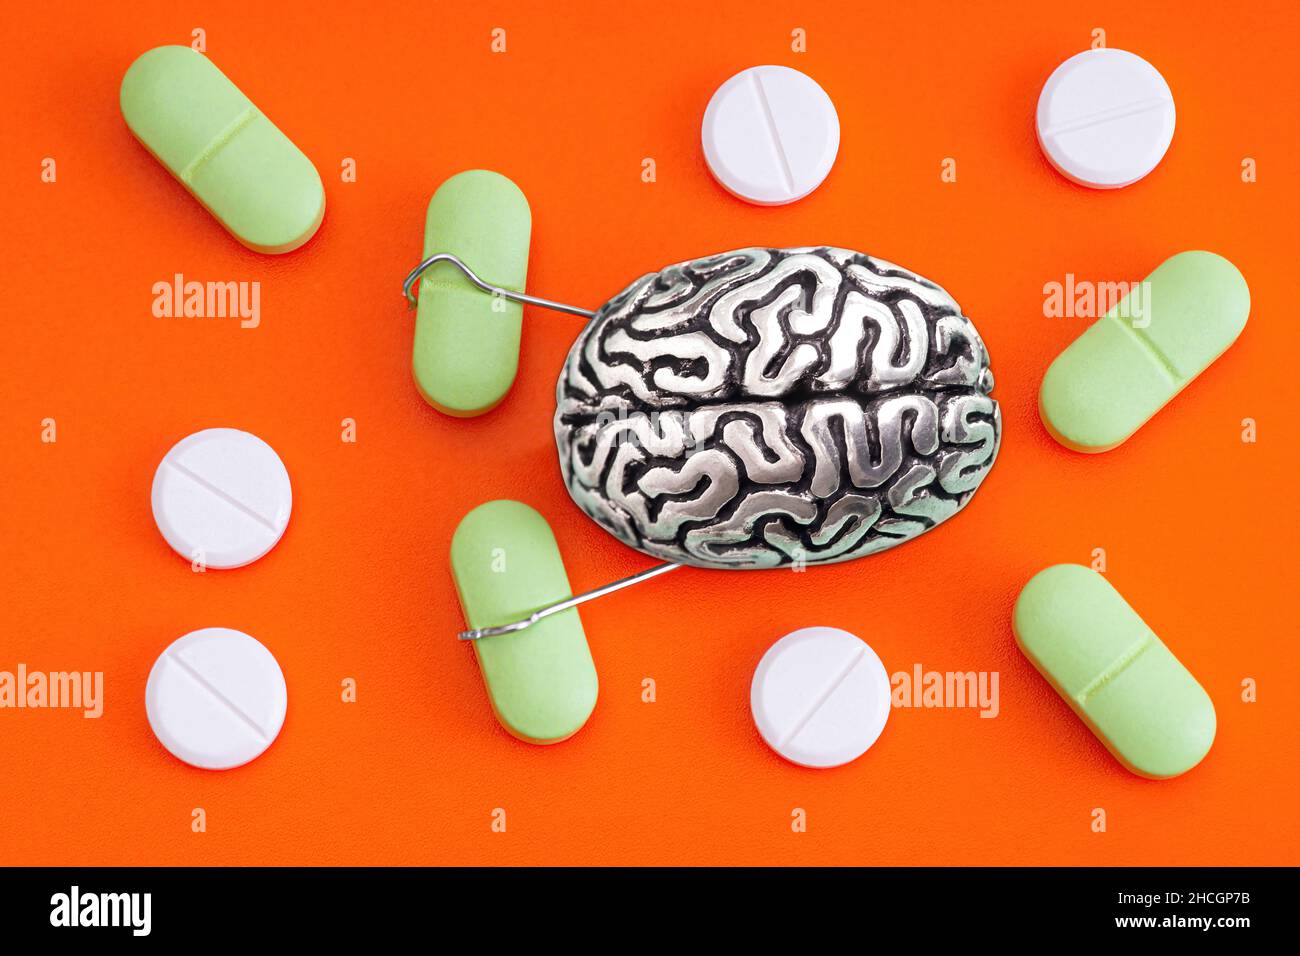 Anatomical copy of a human brain with hands grabbing pills on an orange background. Drug addiction concept. Stock Photo